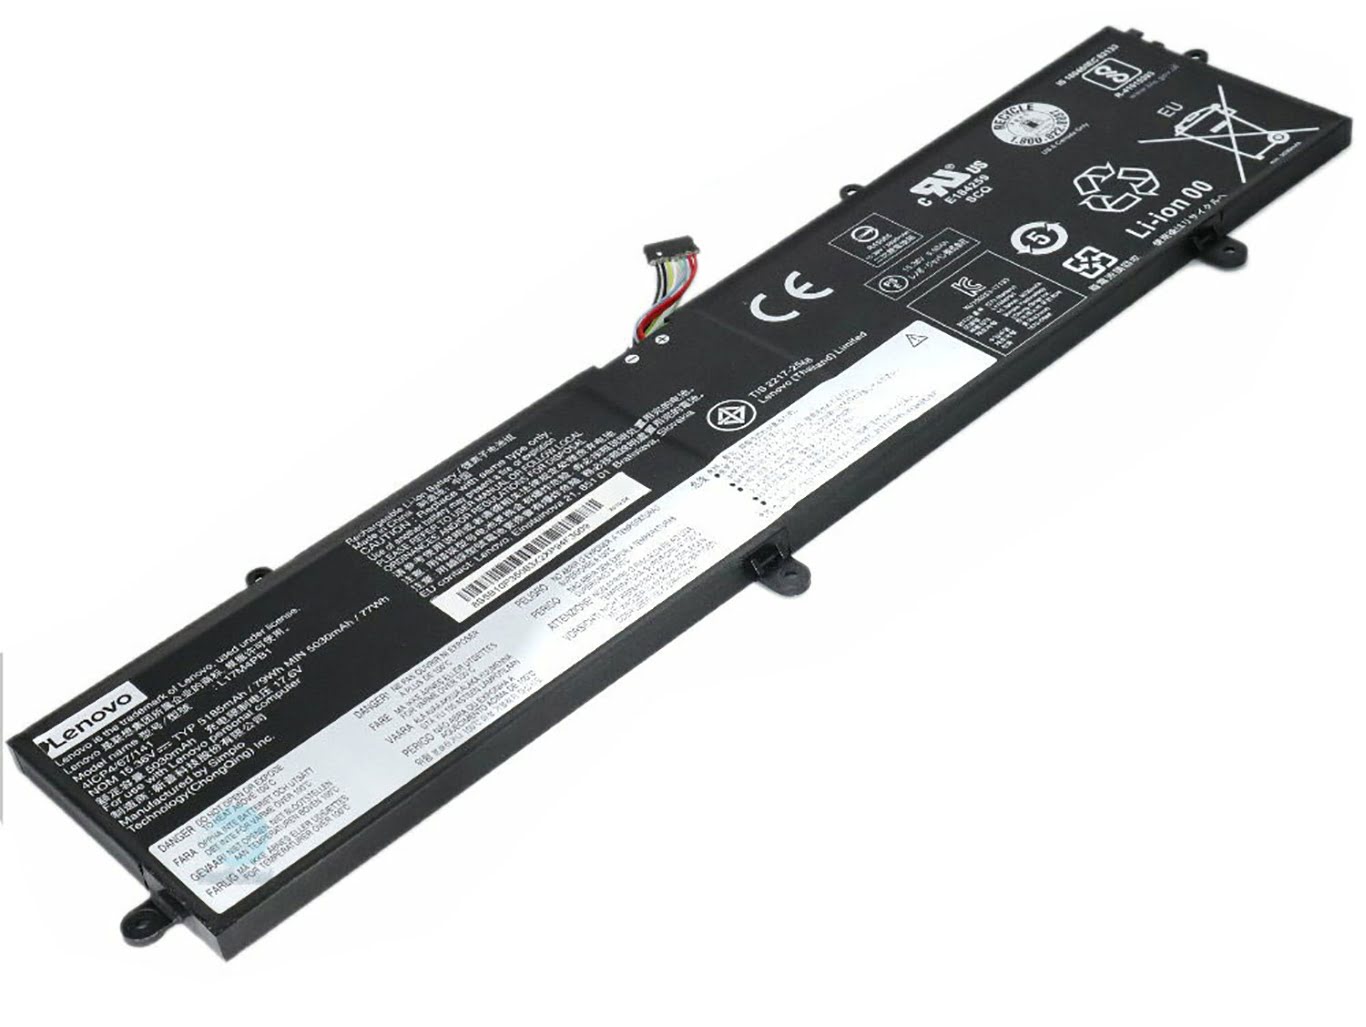 5B10P35082, 5B10P35083 replacement Laptop Battery for Lenovo 720S-15, IdeaPad 720s touch-15ikb, 15.36v, 79wh